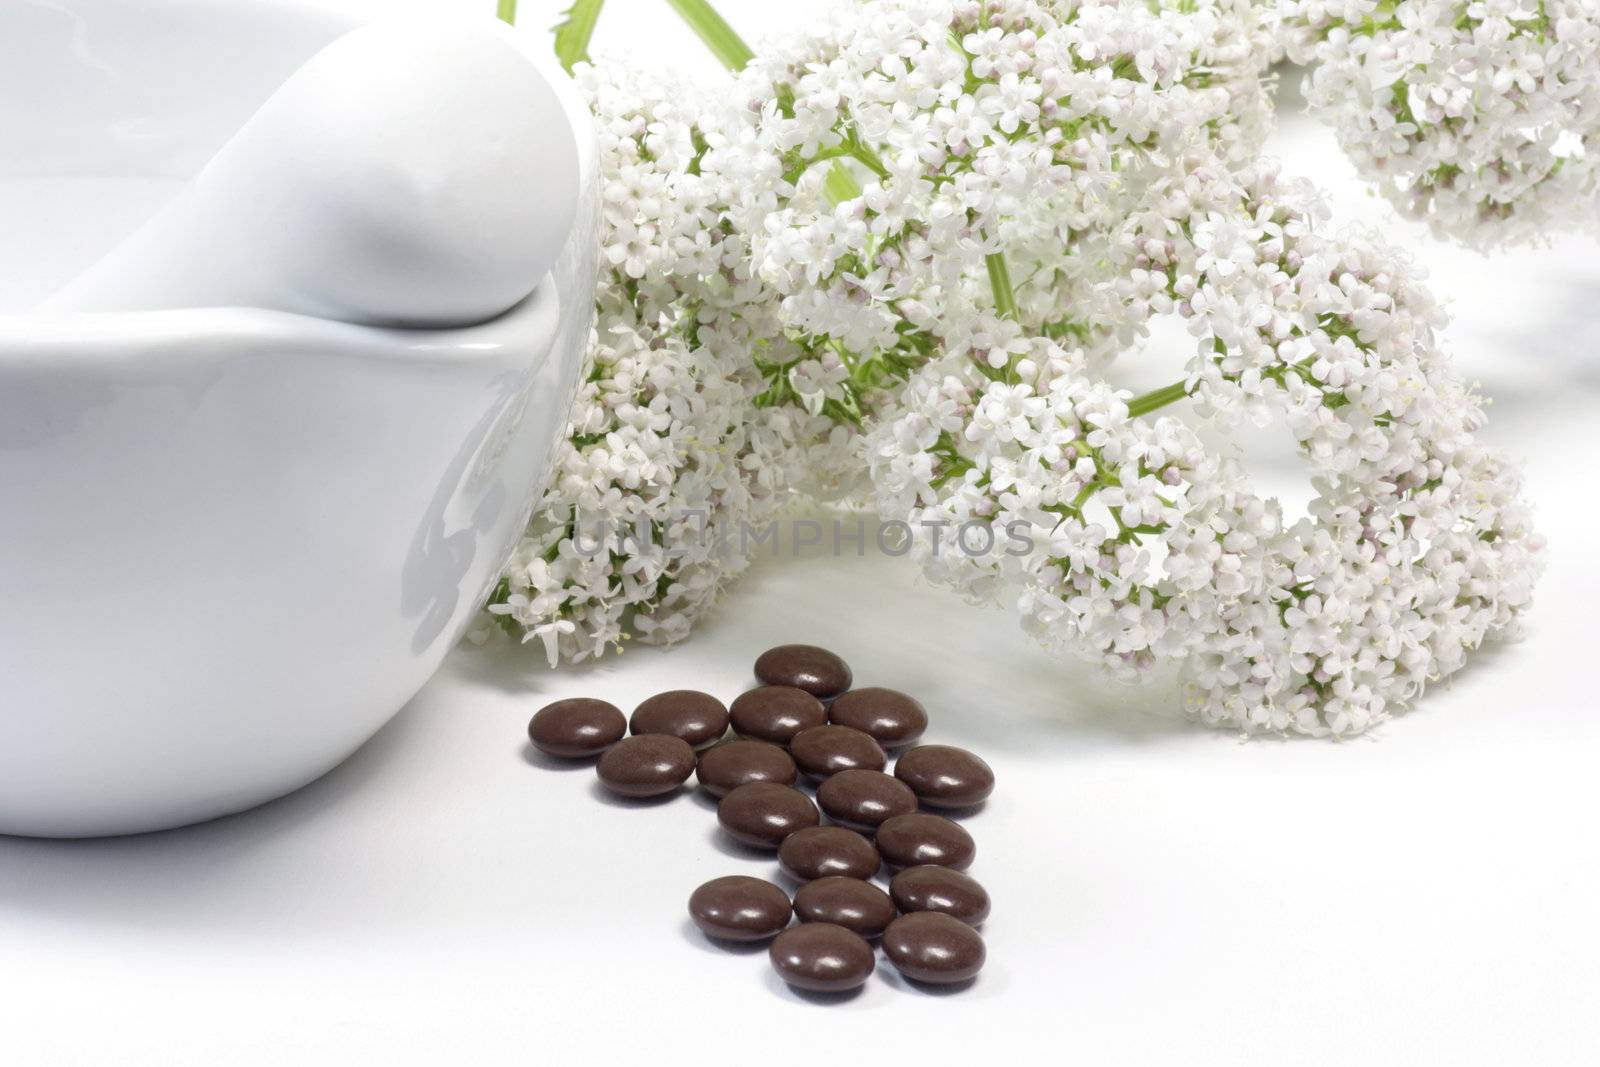 Valerian blossoms with mortar and brown pills over white background